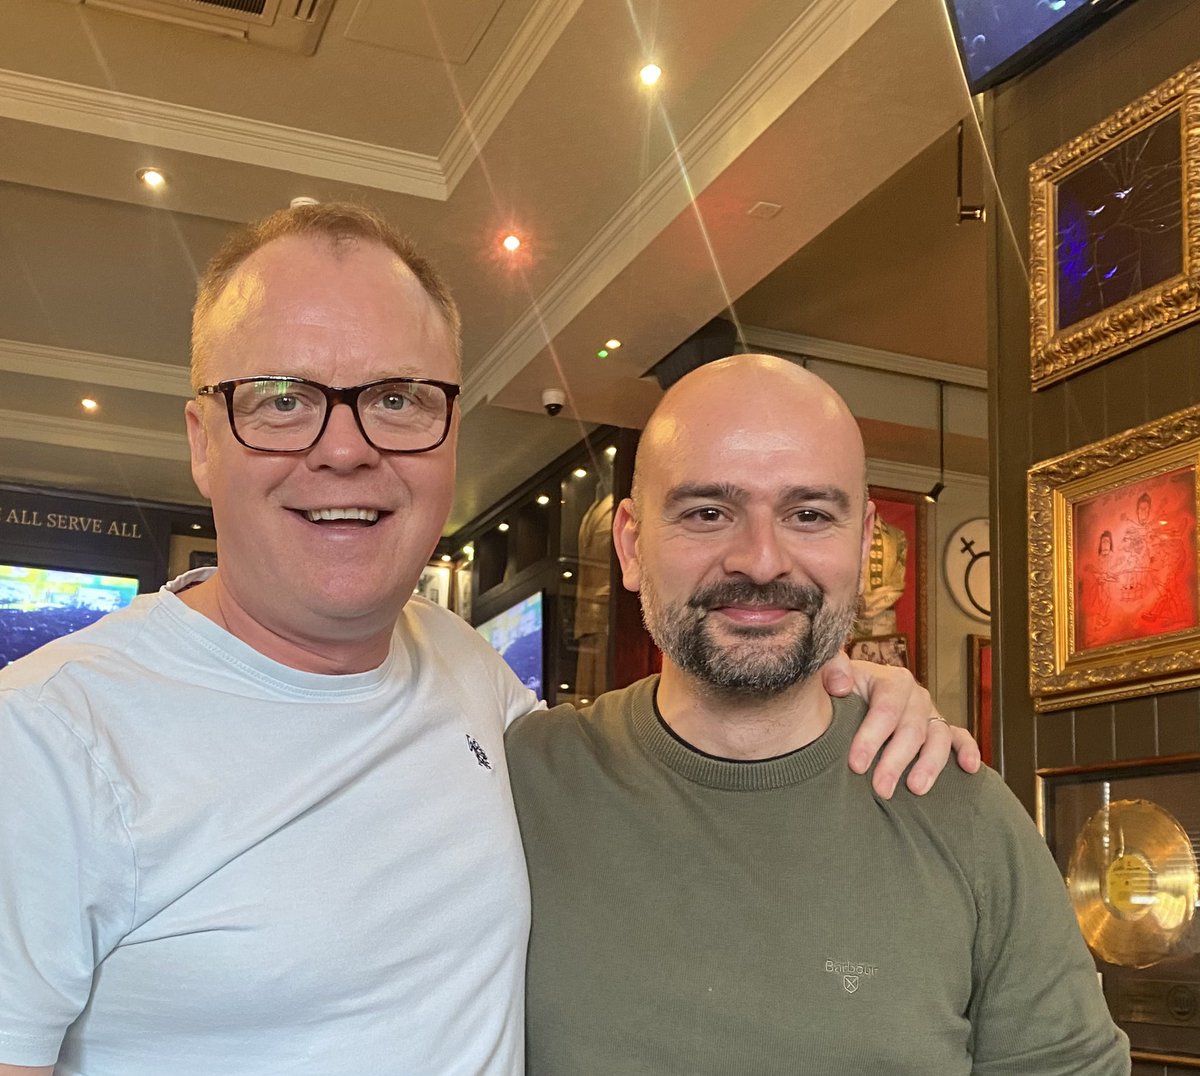 Hemodynamics and @ICUltrasonica POCUS meeting in London …so many years after @StGeorgesTrust experience. Friendship is keeping important things still on.